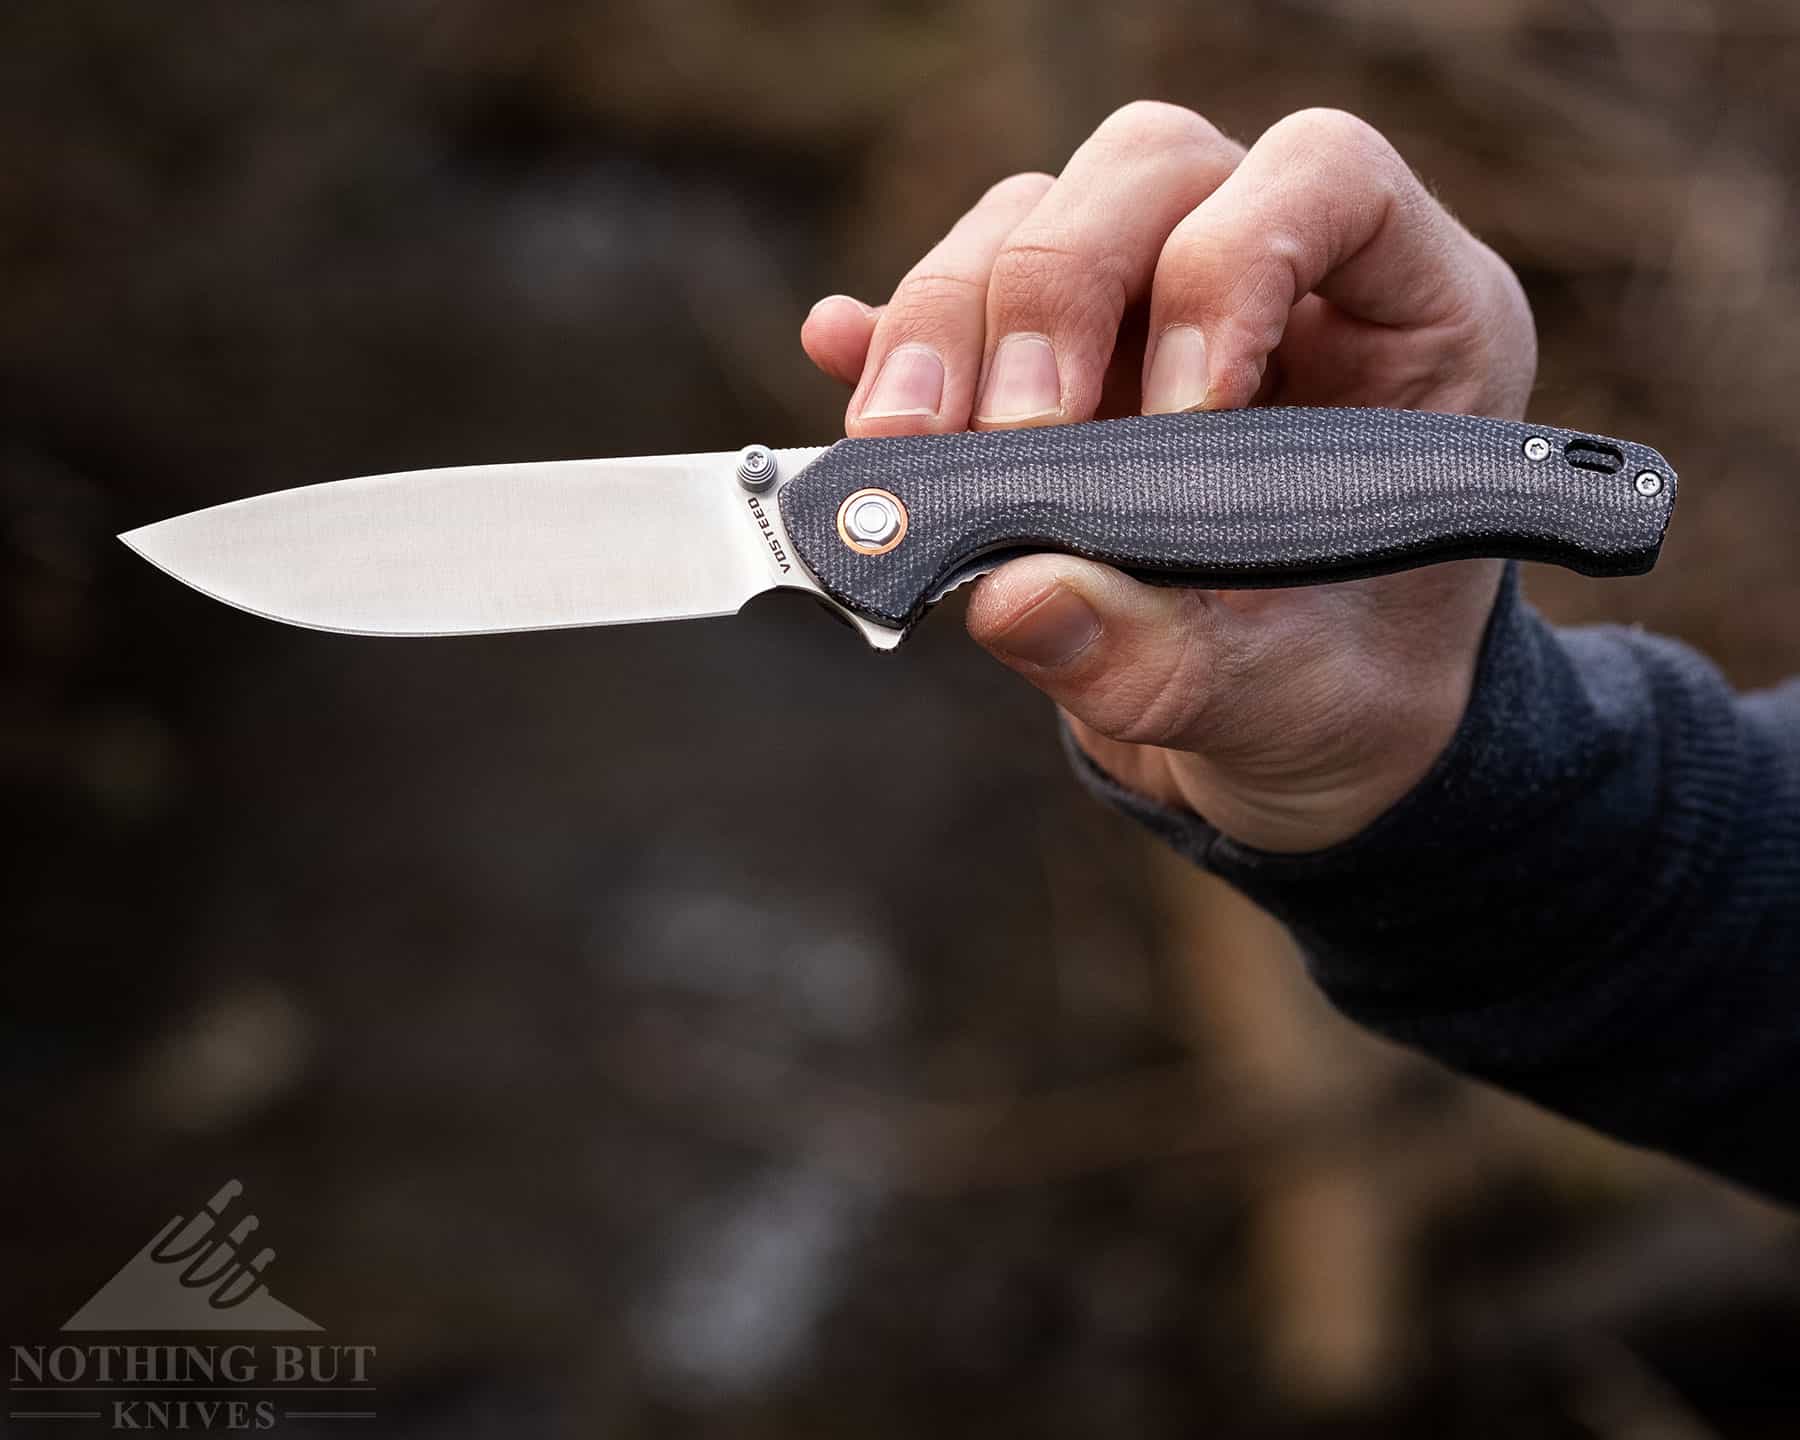 The micarta handle on the Labrador is easy to grip even when wet, but the color options are all a bit muted. 